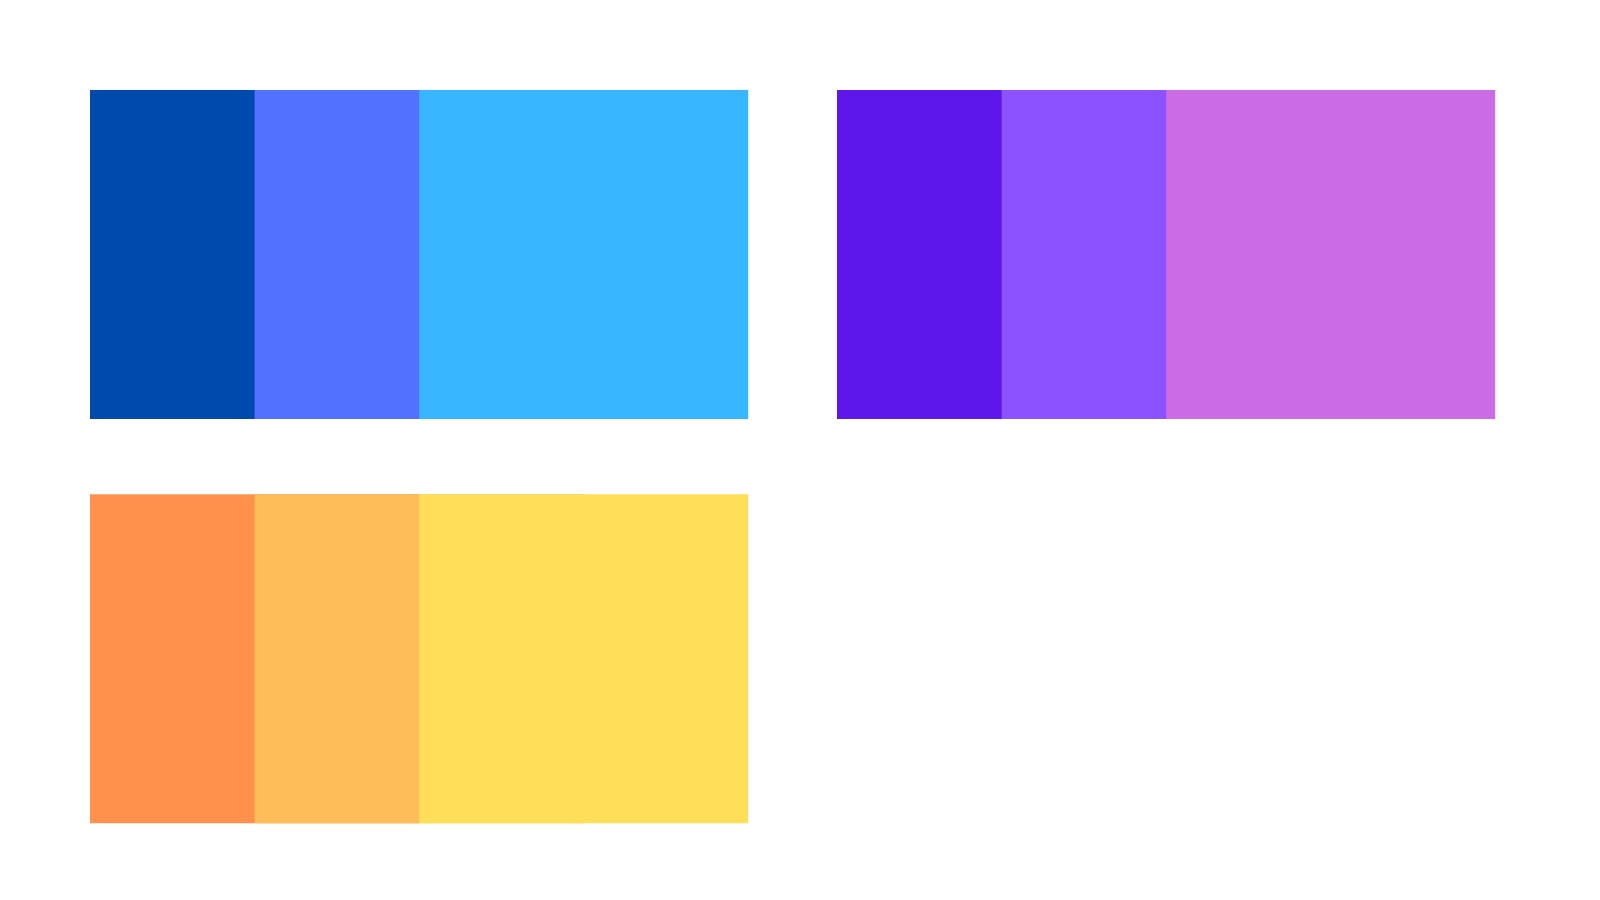 Three shades of blue grouped together, three shades of purple grouped together, and three shades of orange grouped together.